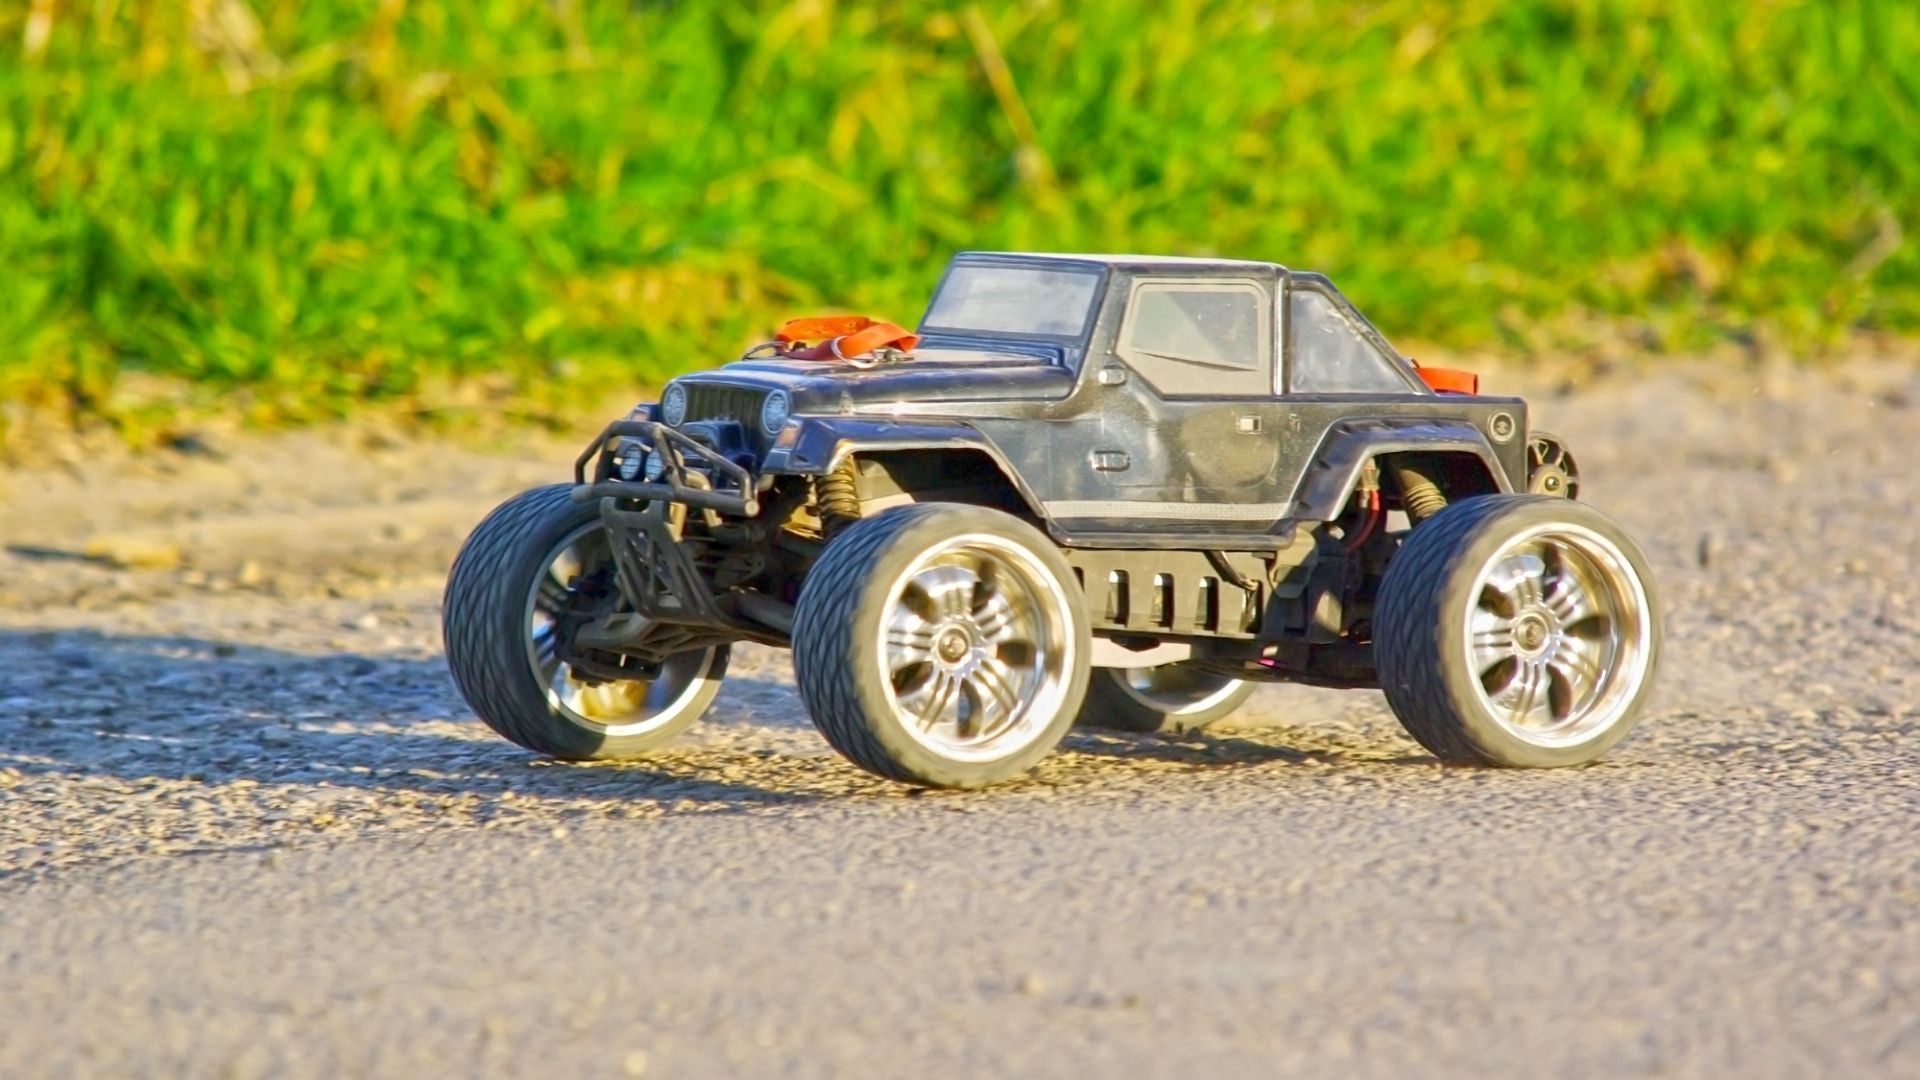 Keep On RC Truckin’ With The Best Radio Controlled Trucks